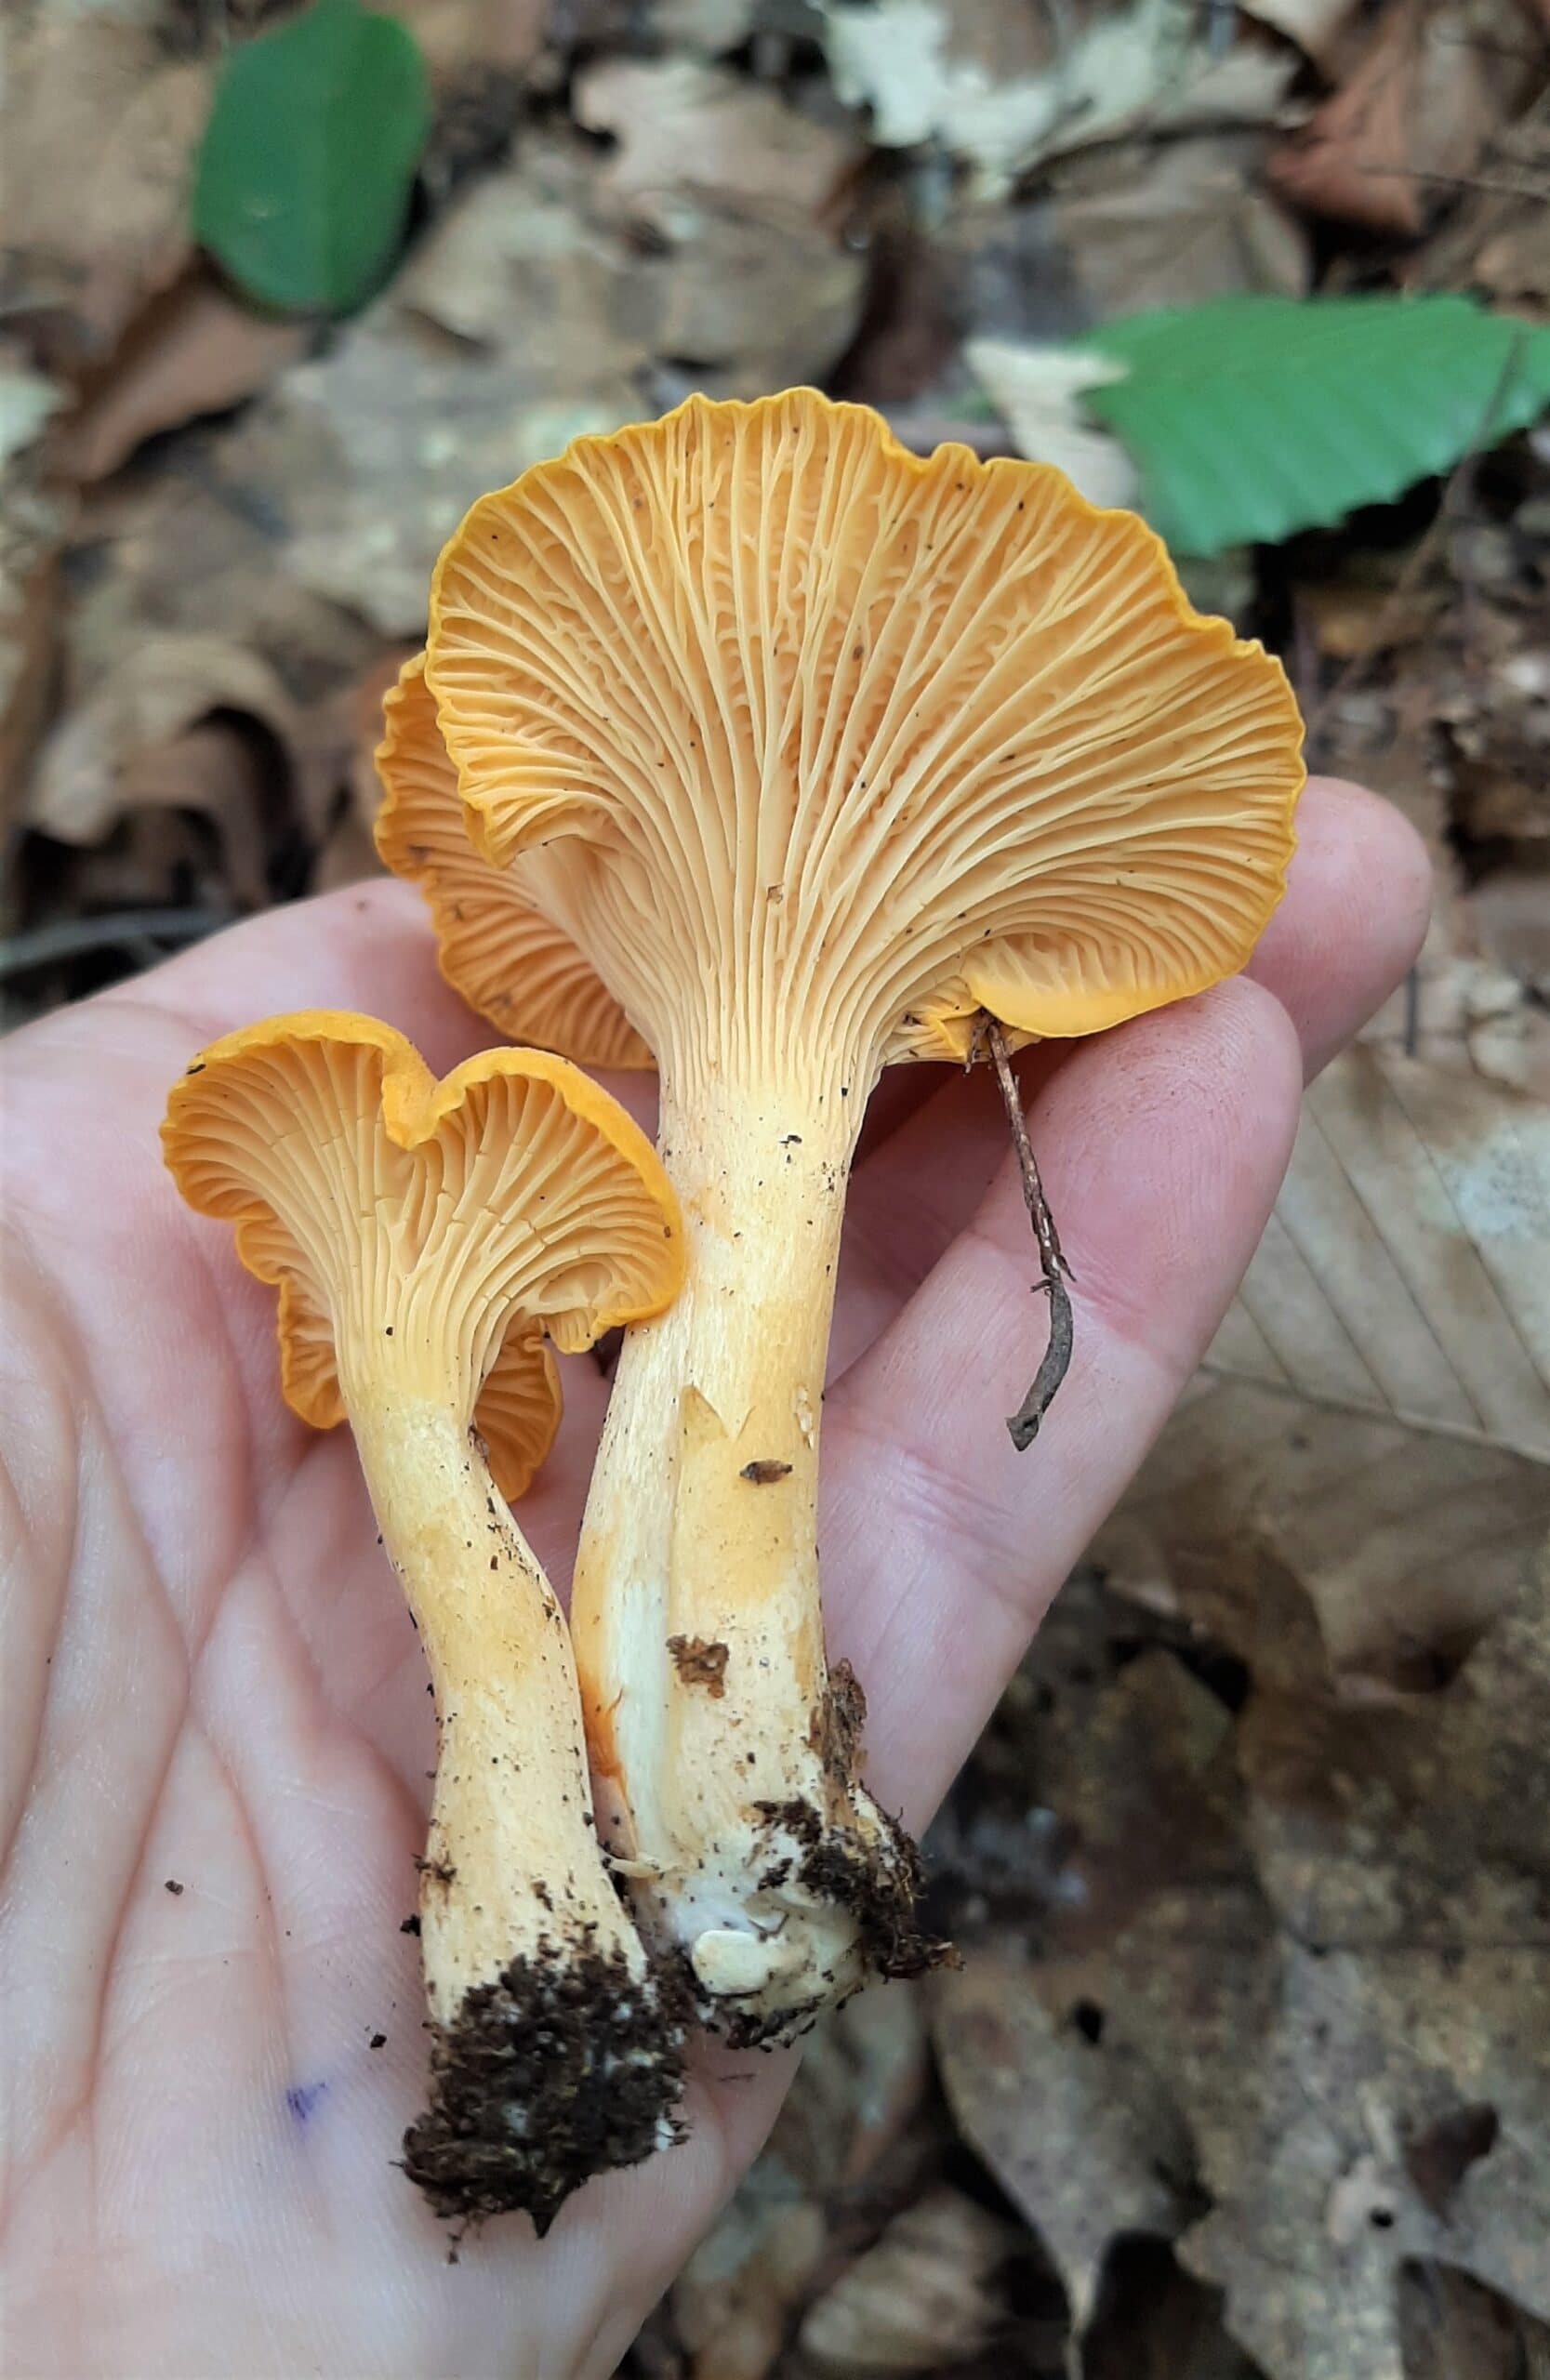 Two chanterelles in hand